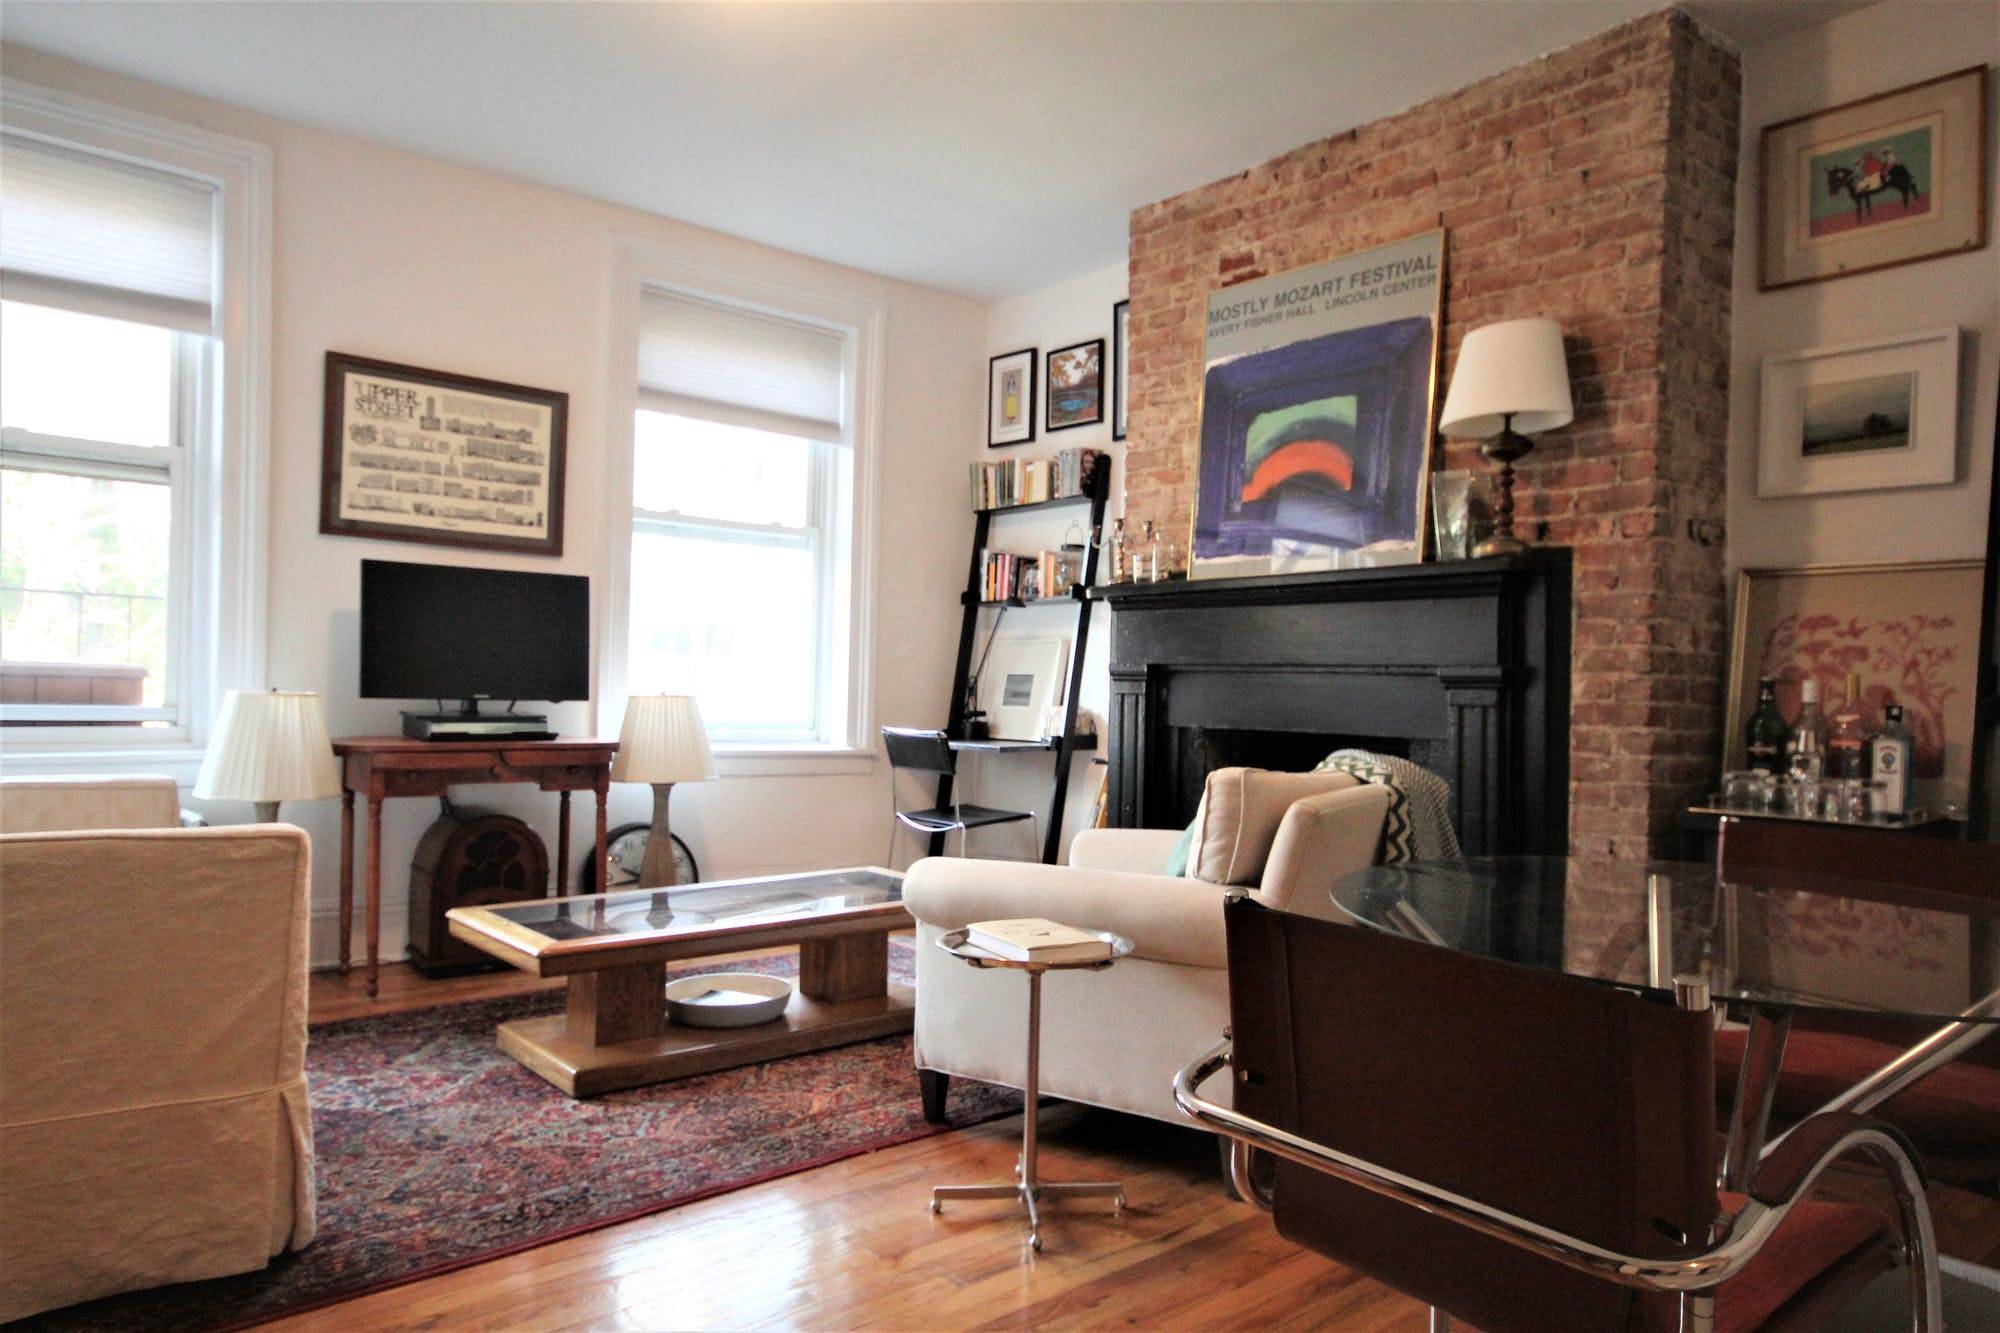 NO FEE AND 1 MONTH FREE This one bedroom apartment sits on a quaint street in prime Murray Hill location.